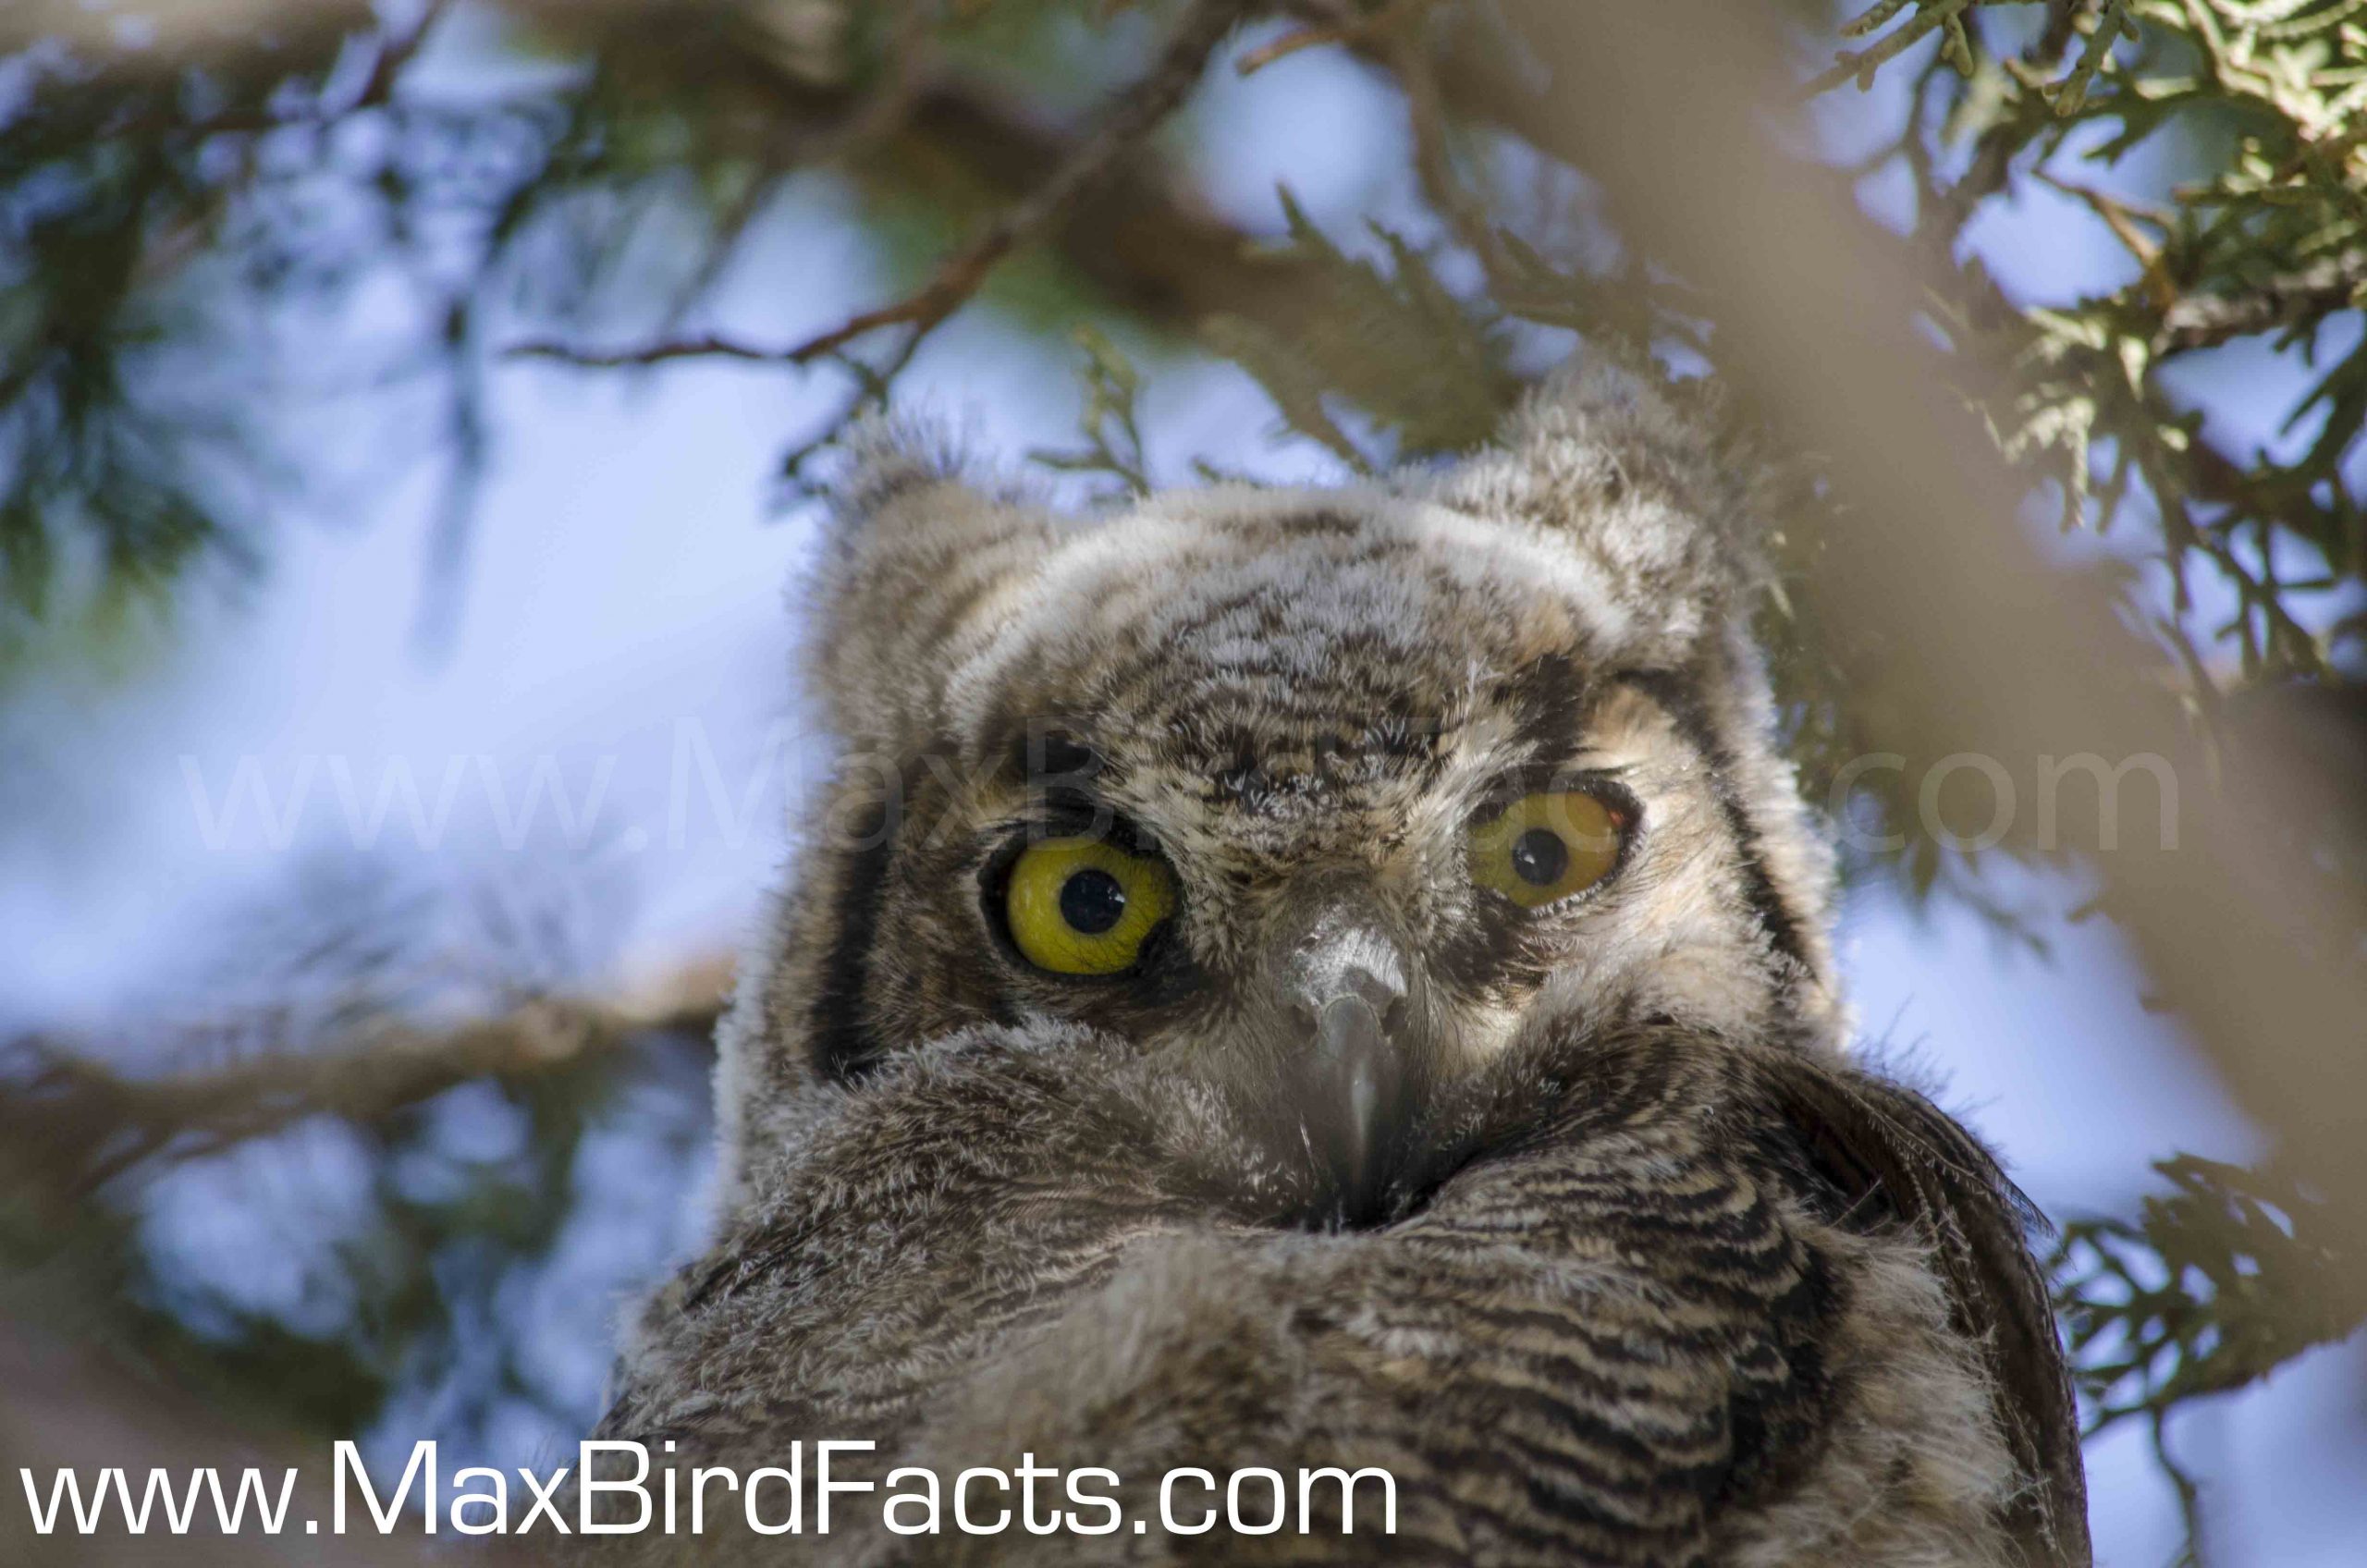 Why_Do_Owls_Hoot_great_horned_owl_chick_looking_at_photographer